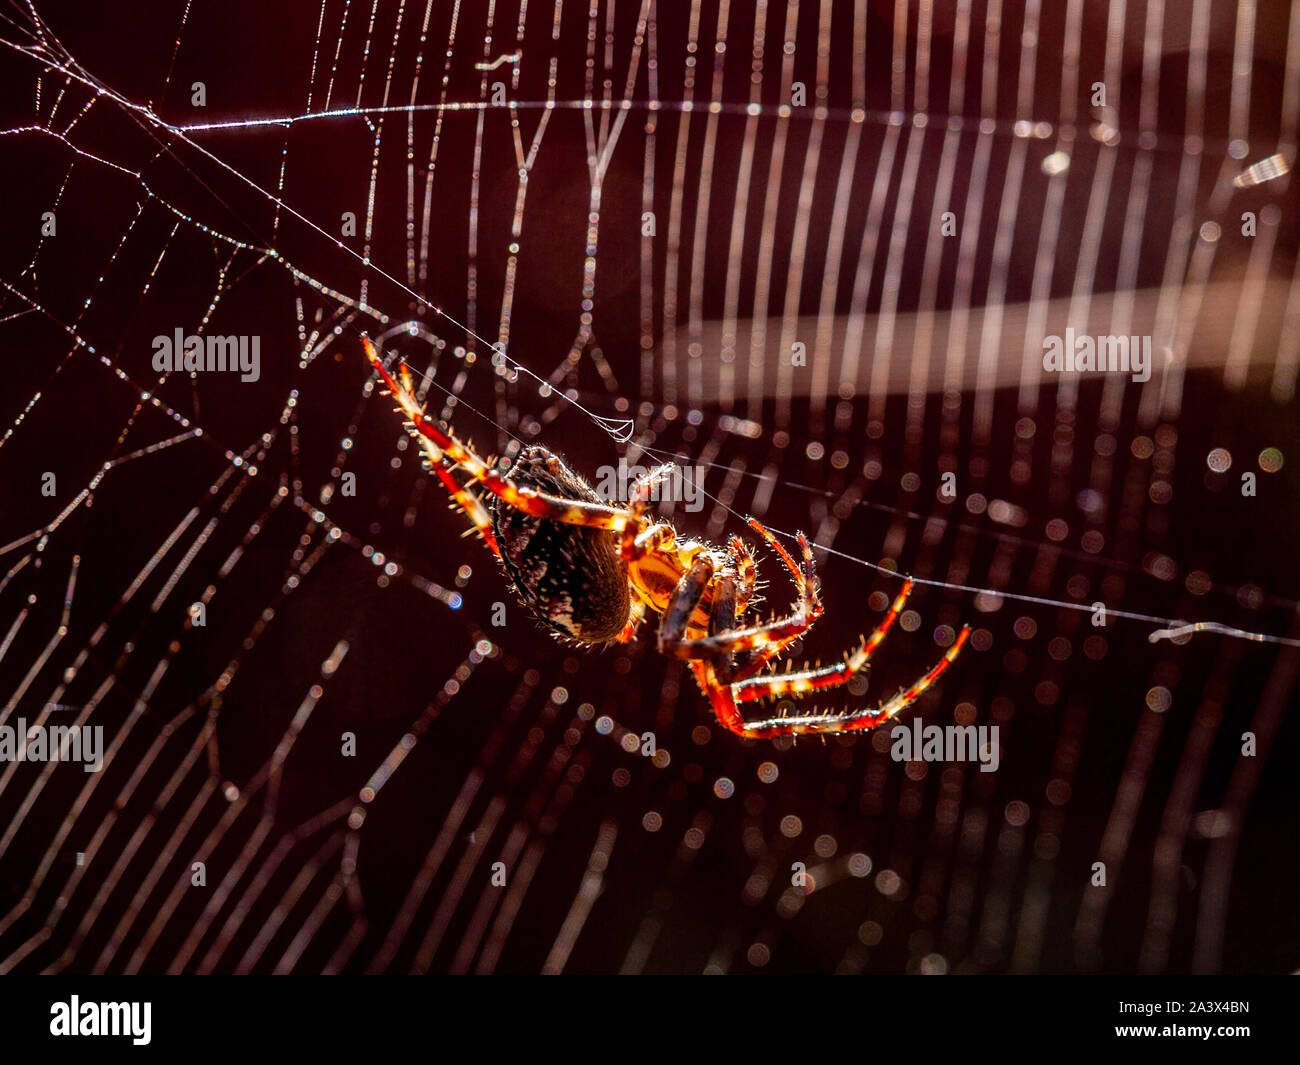 Garden spider hanging by a thread in the sunlight with its web in the background. Silk can be seen coming from its spinnerets. Stock Photo